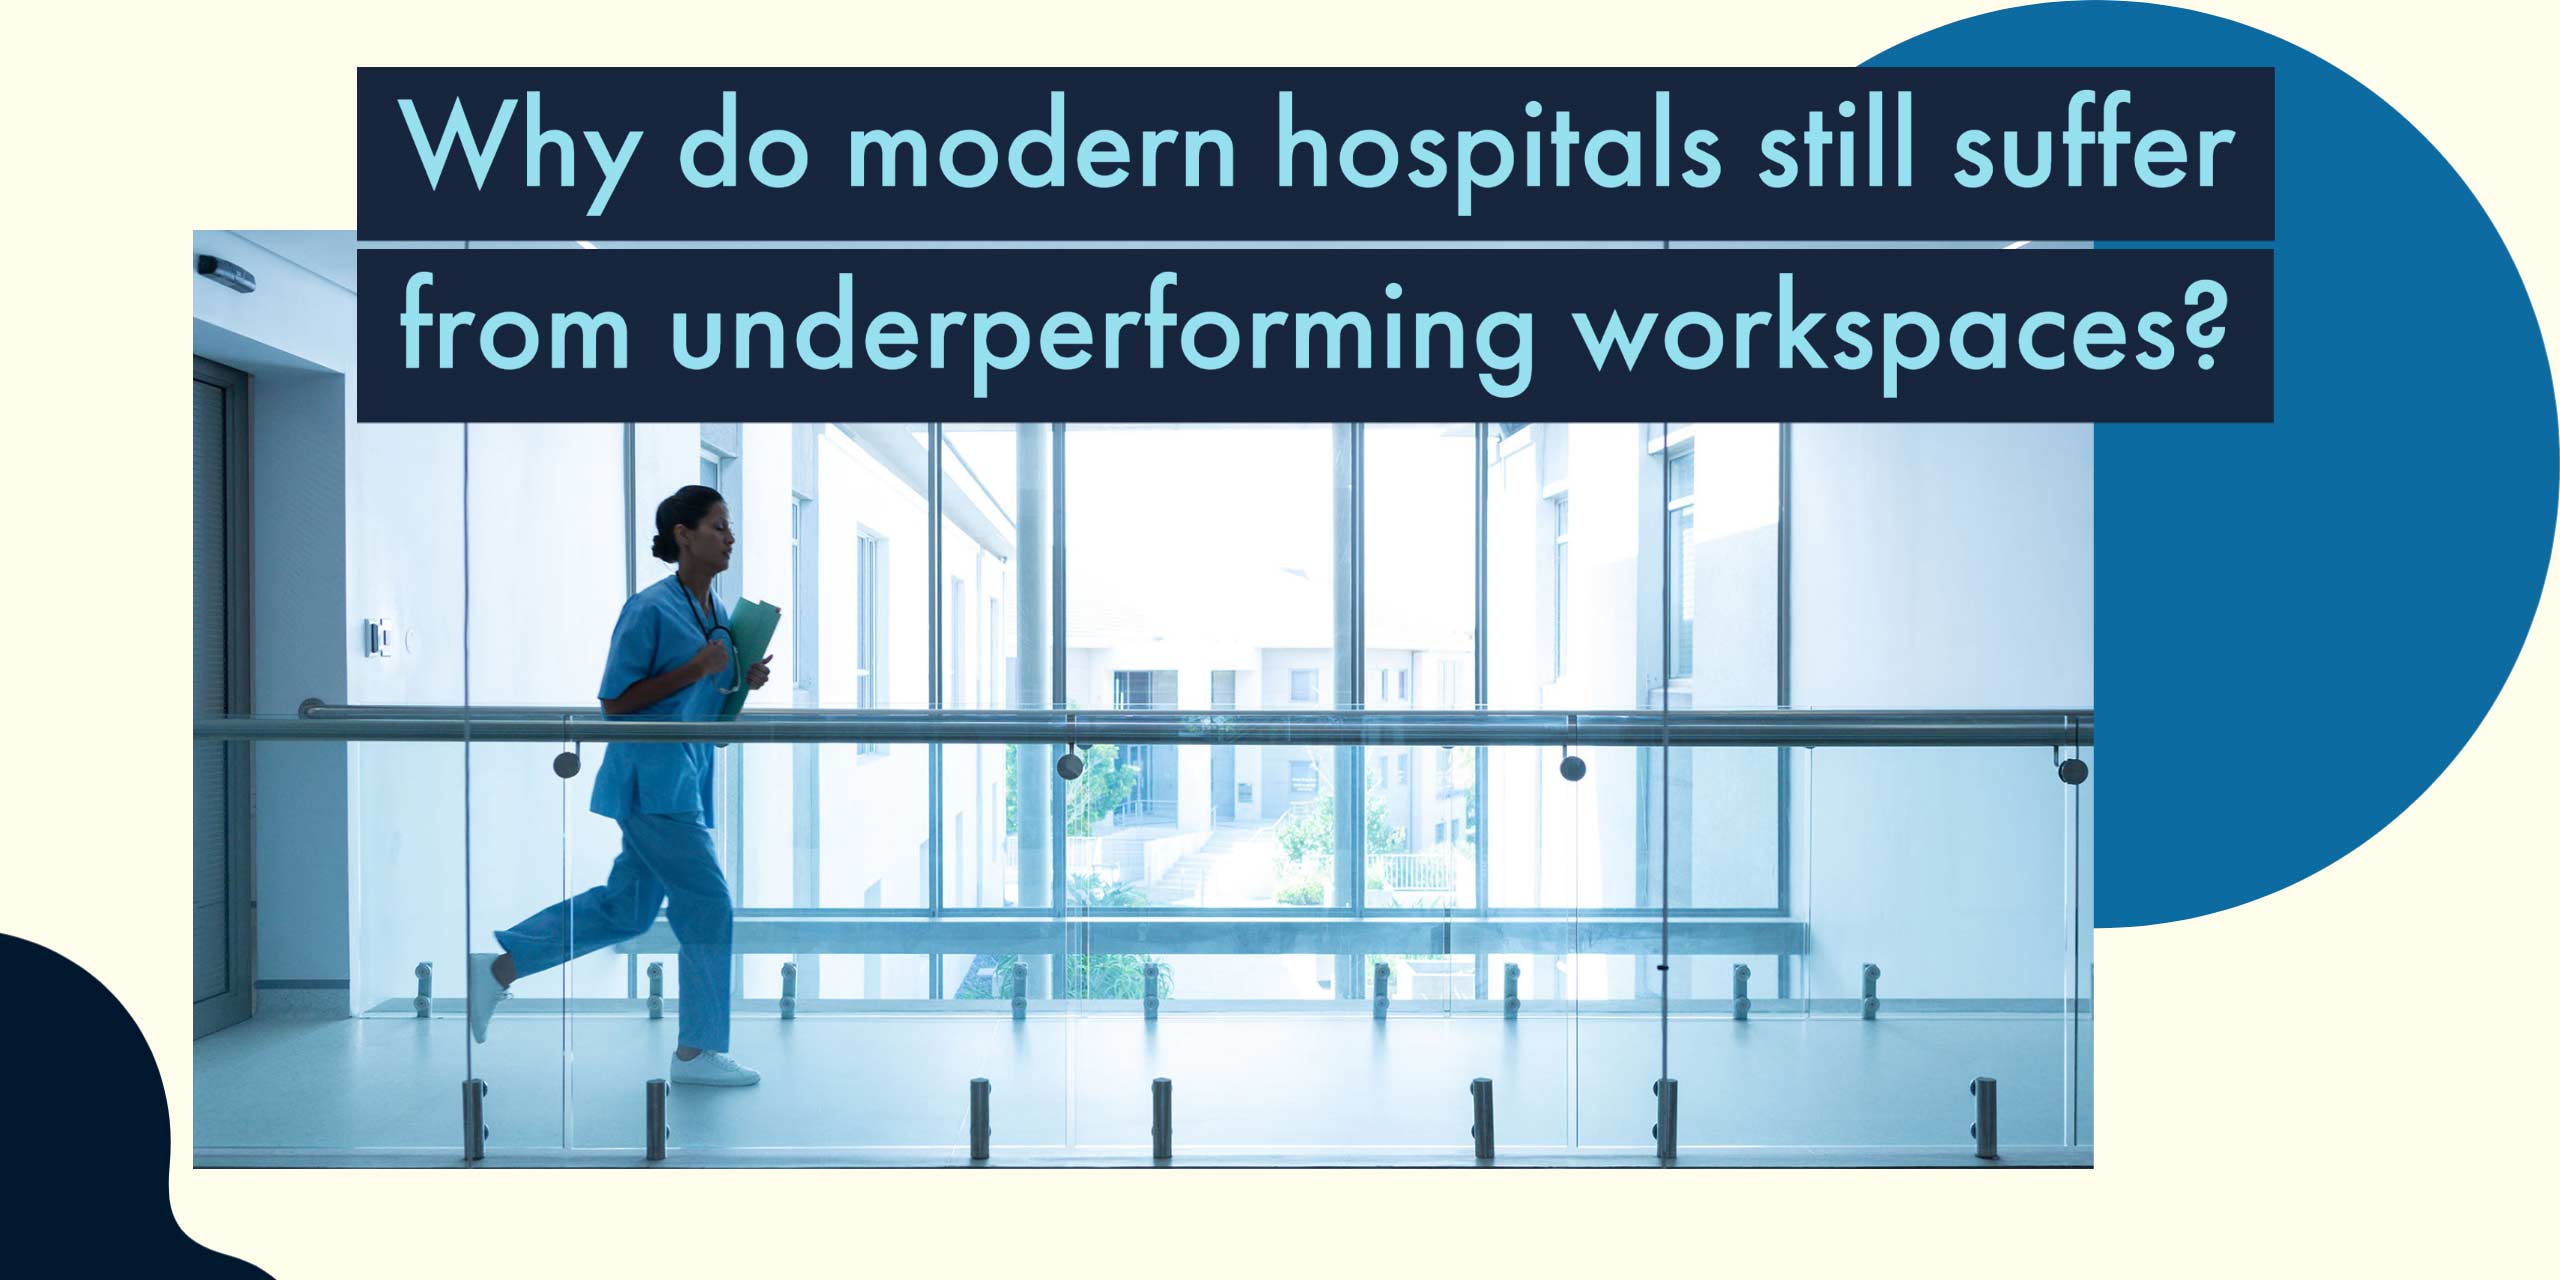 Why do modern hospitals still suffer from underperforming workspaces?